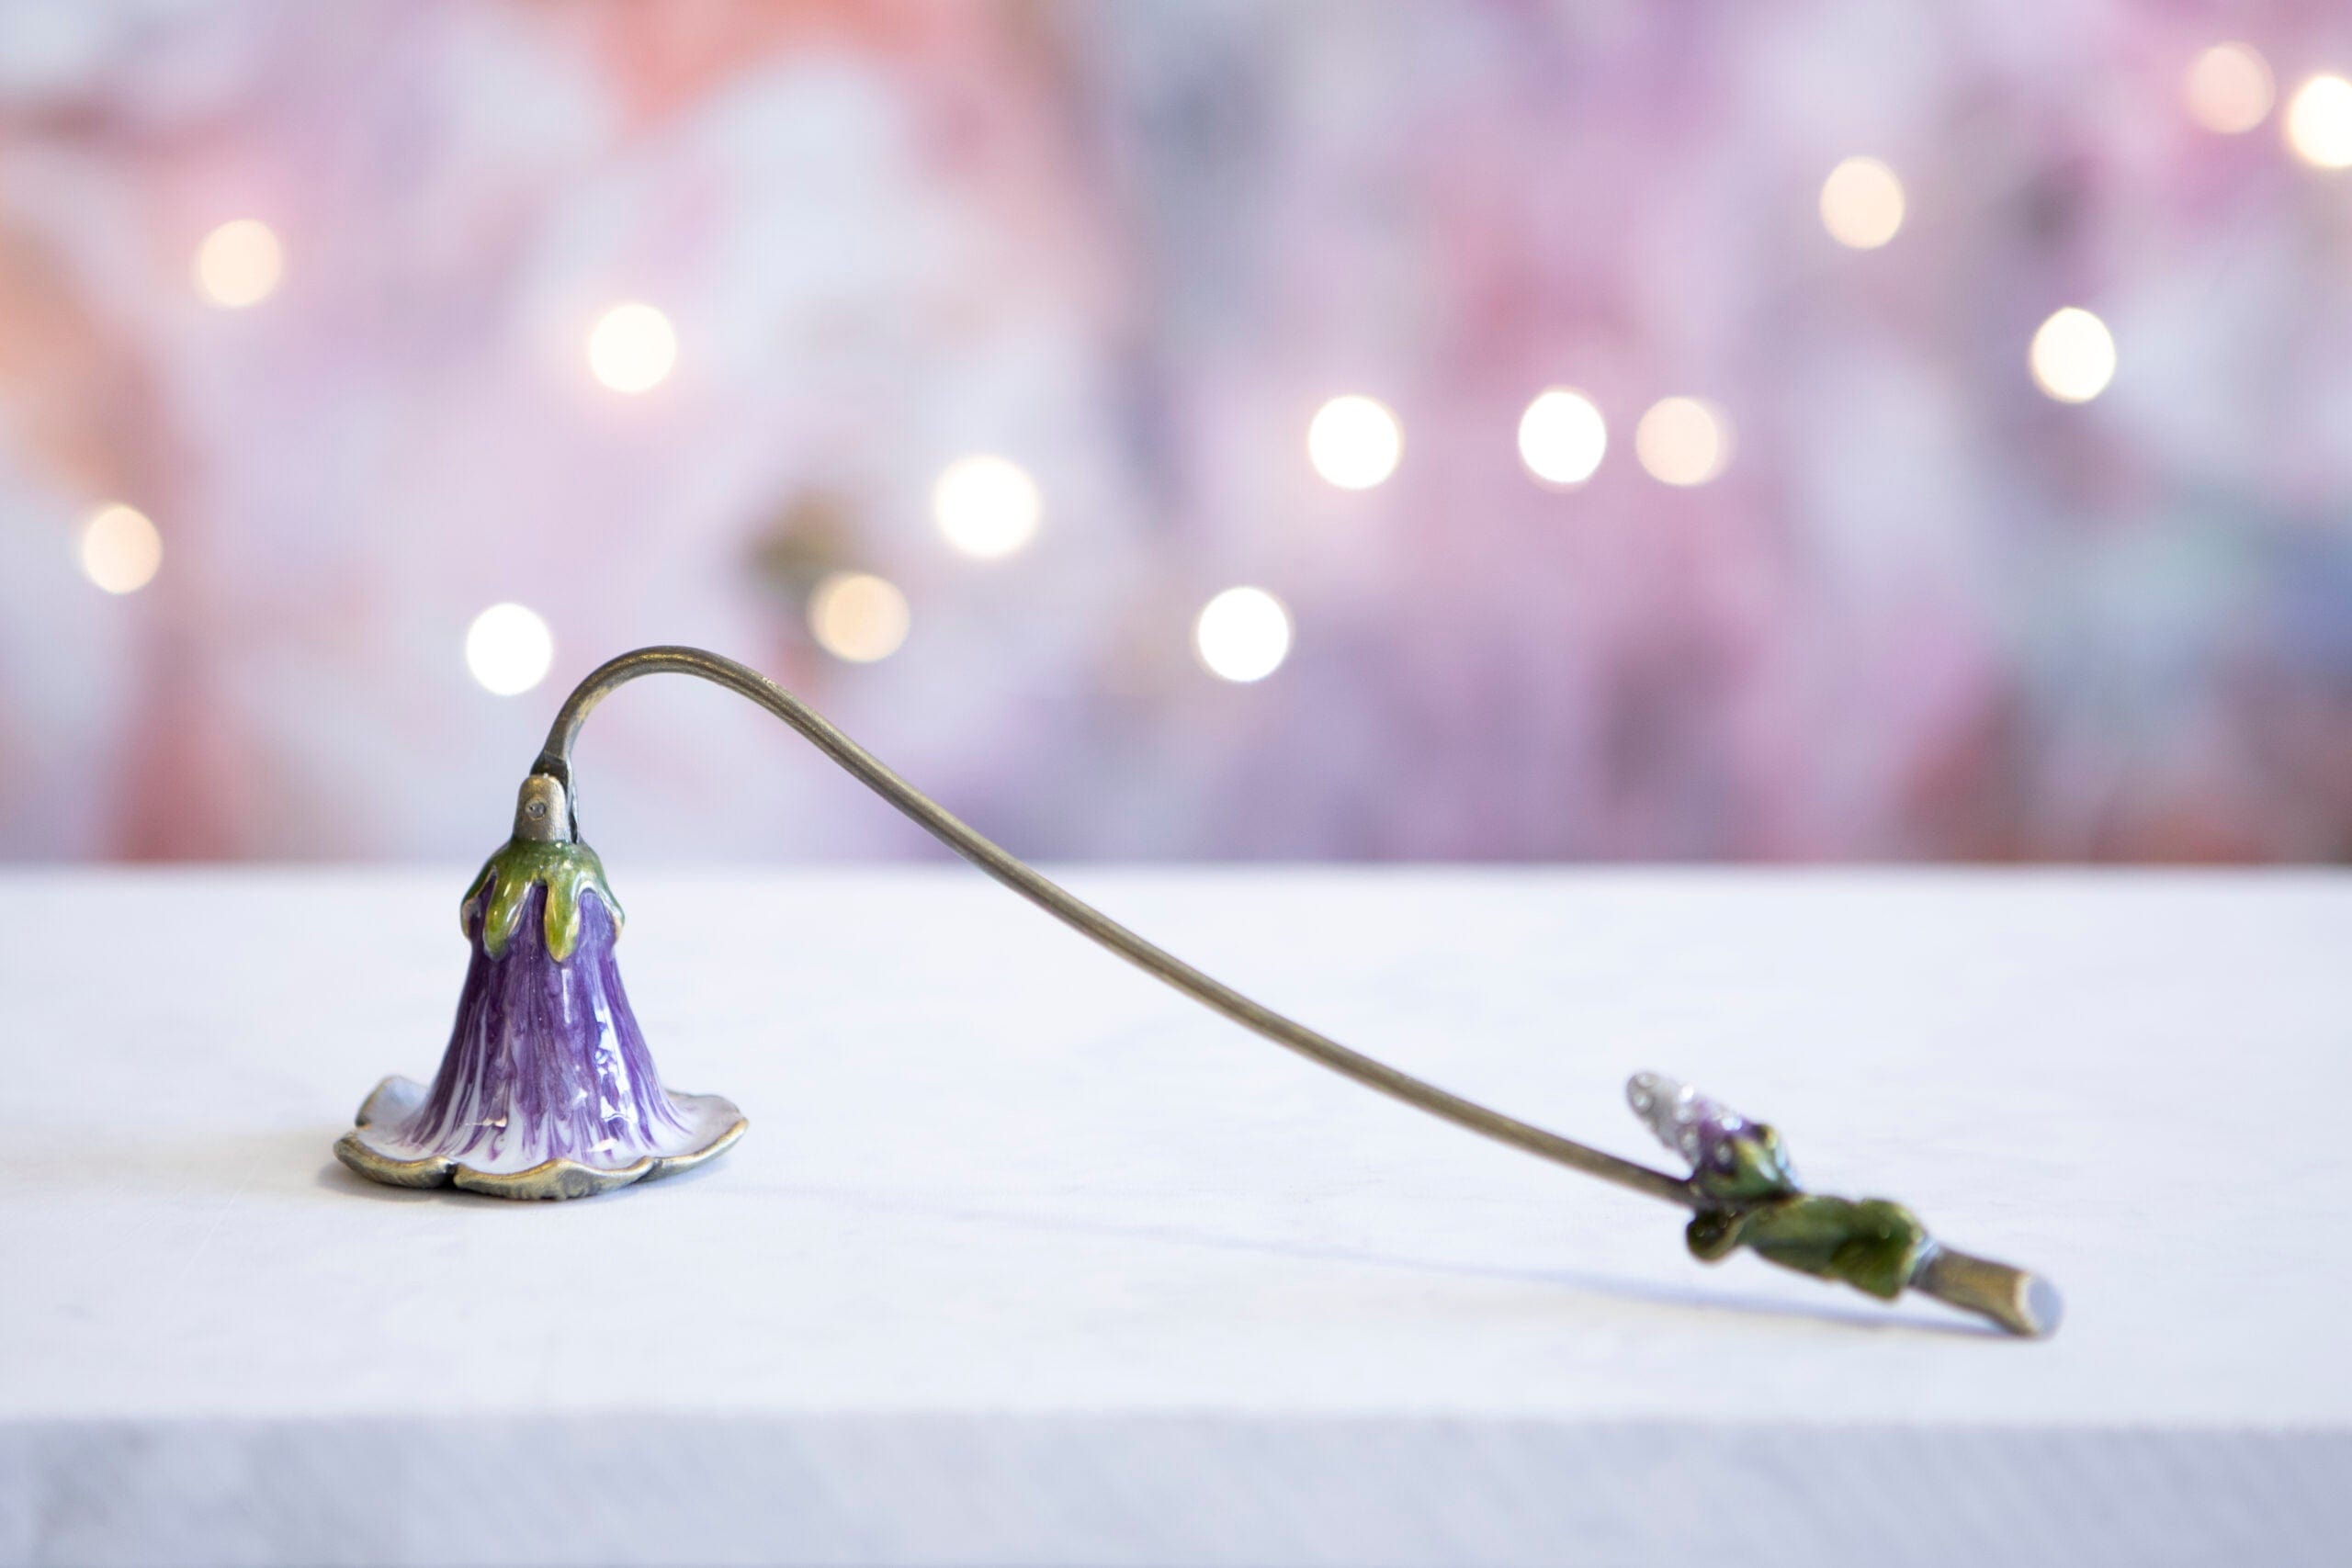 Lily Candle Snuffer